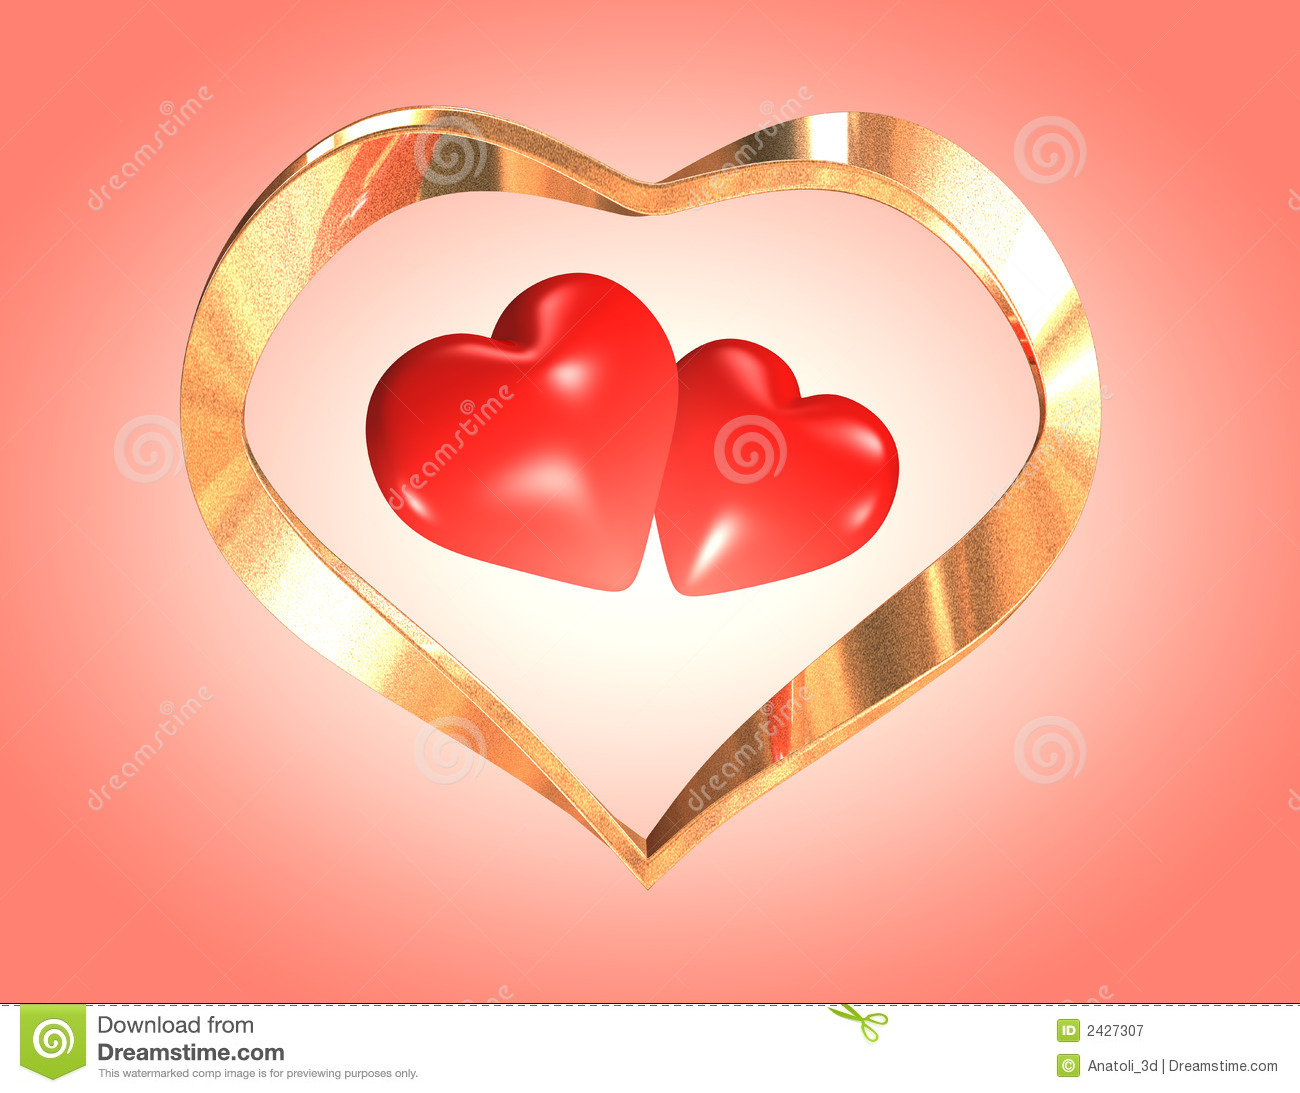 Wedding Hearts  Hearts For Enamored  Two Red Hearts In A Gold